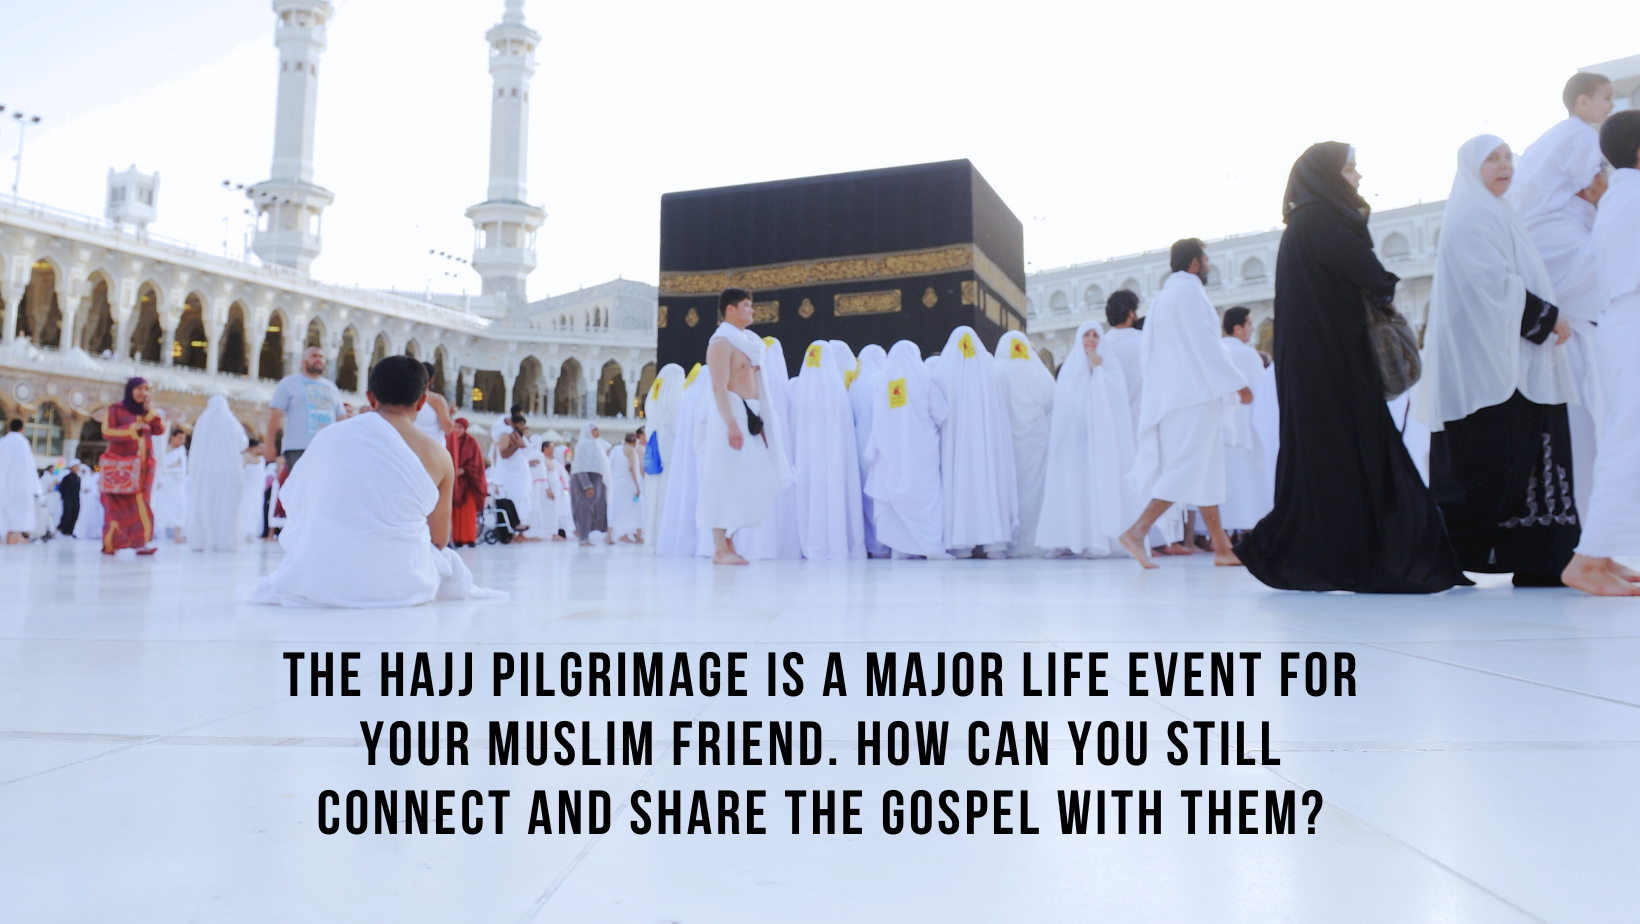 The Hajj pilgrimage is a major life event for your Muslim friend. How can you still connect and share the gospel with them?